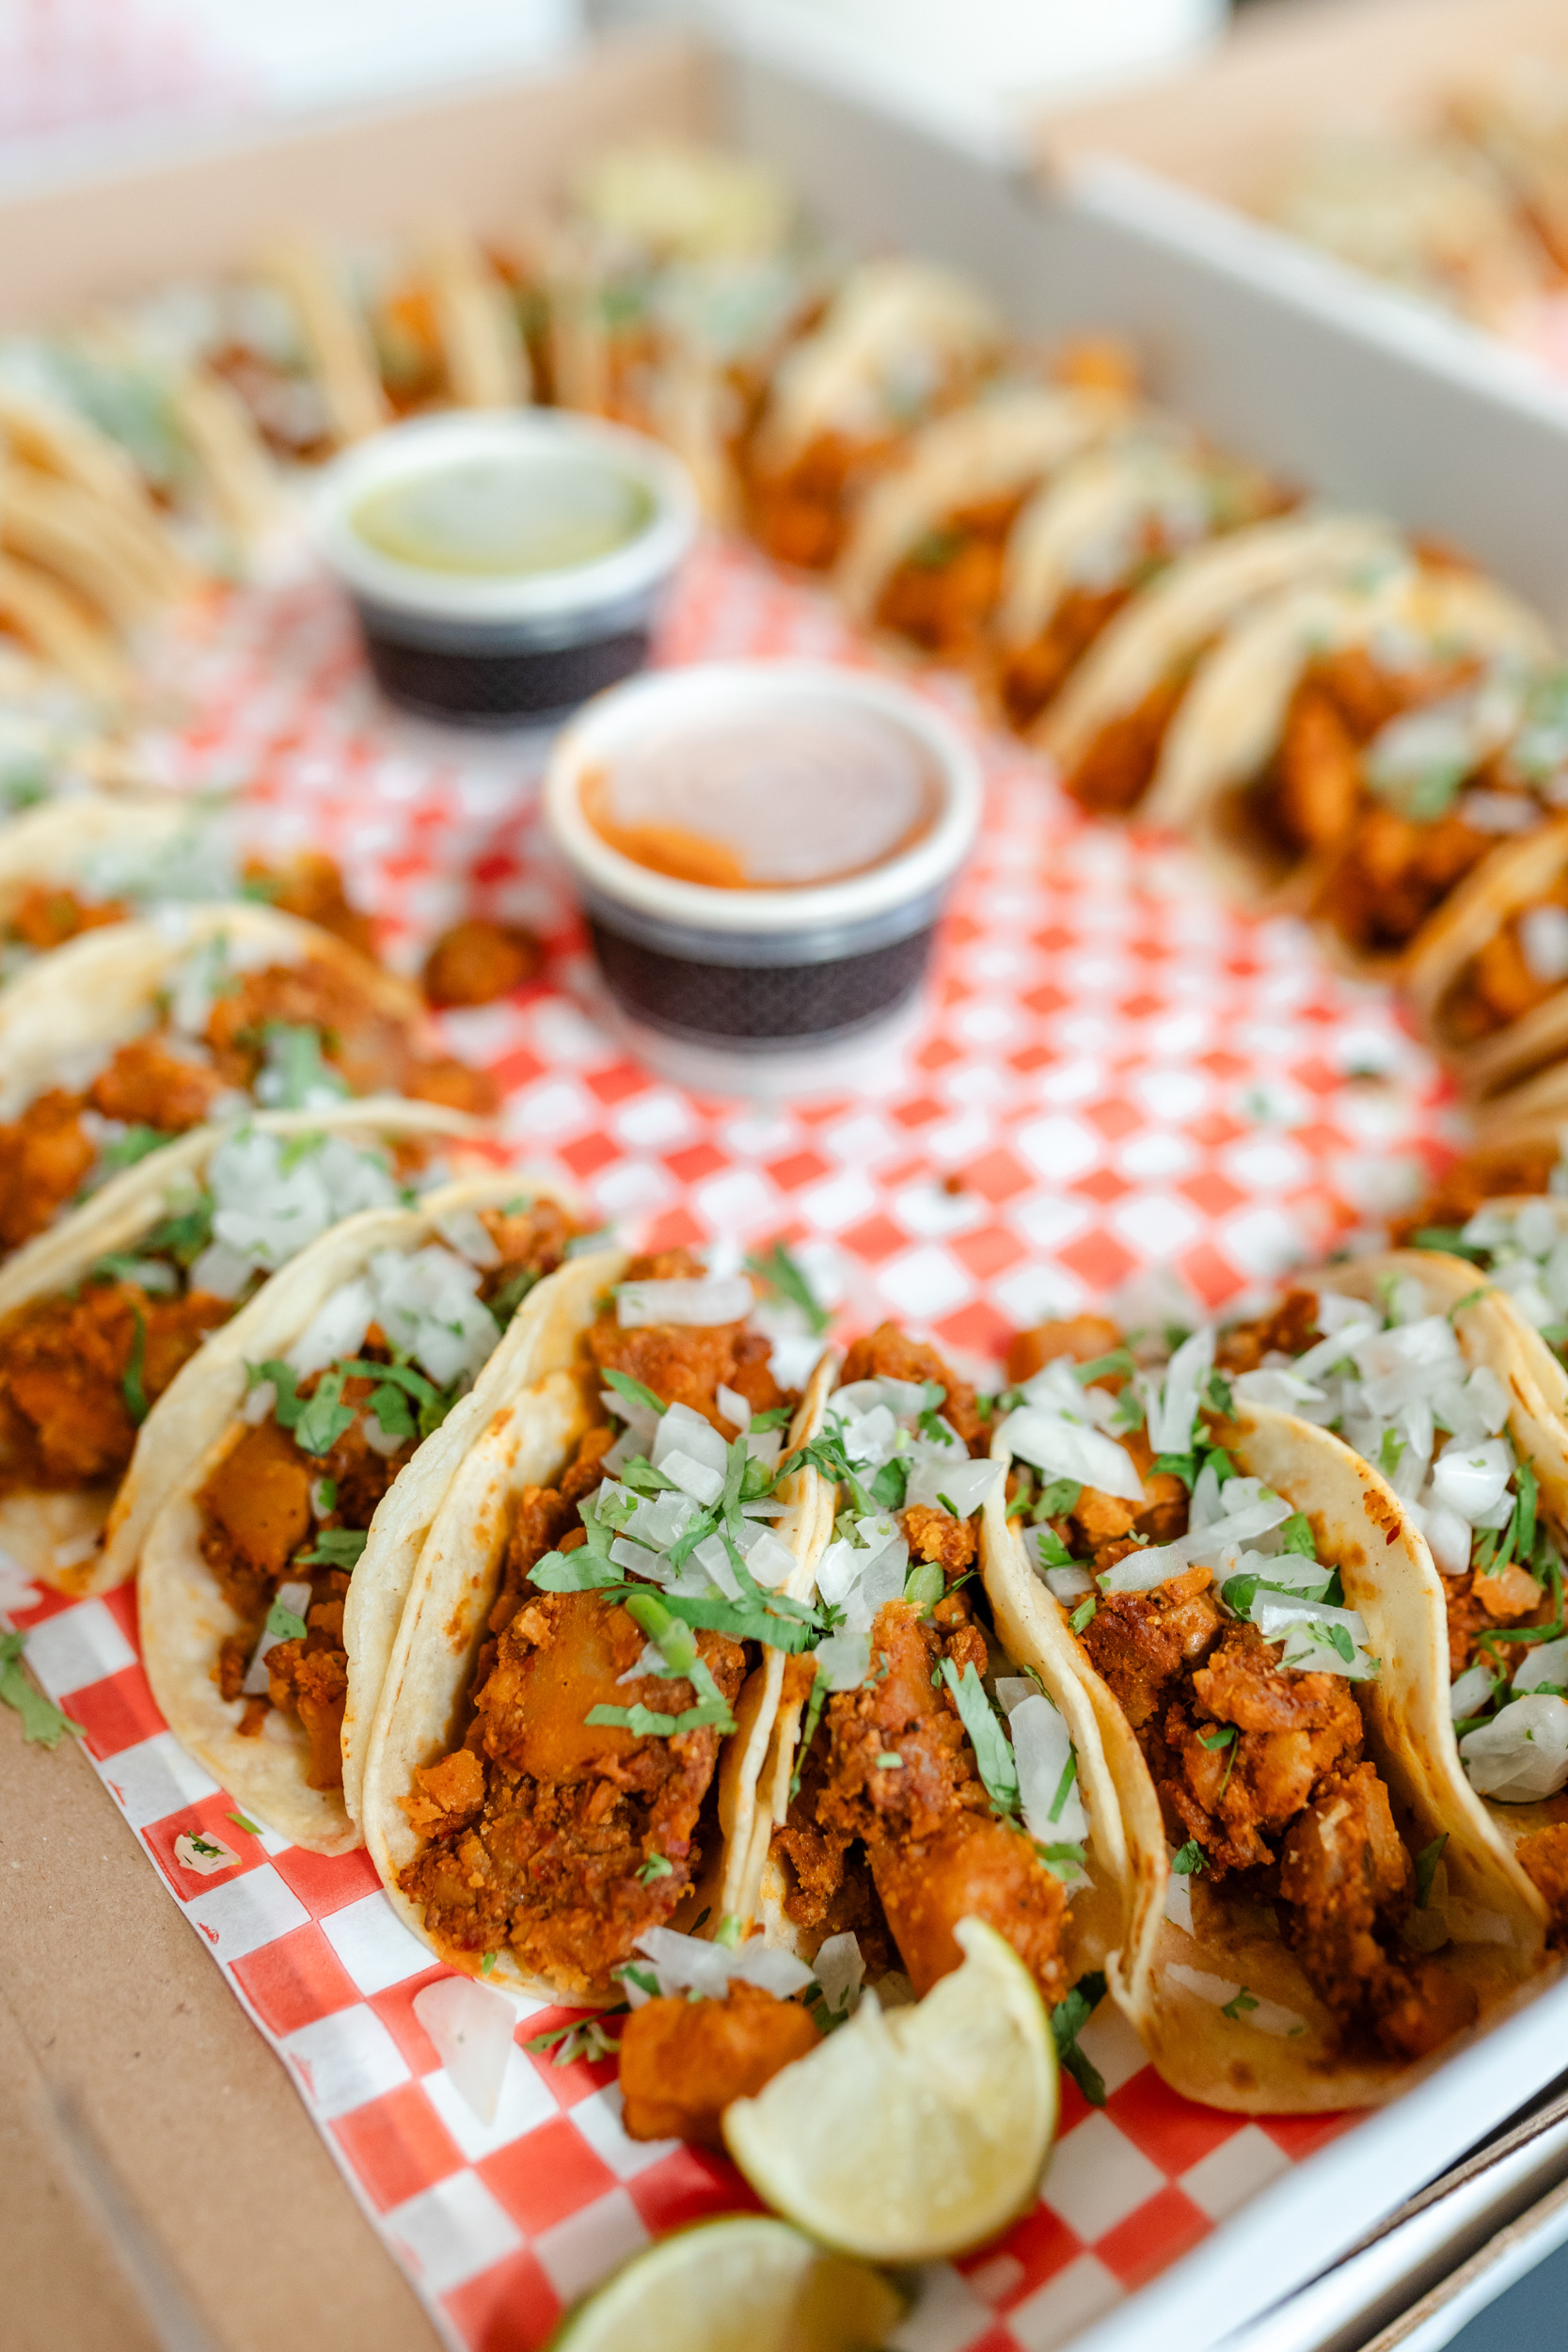 A tray of tacos sitting on top of a checkered tablecloth.